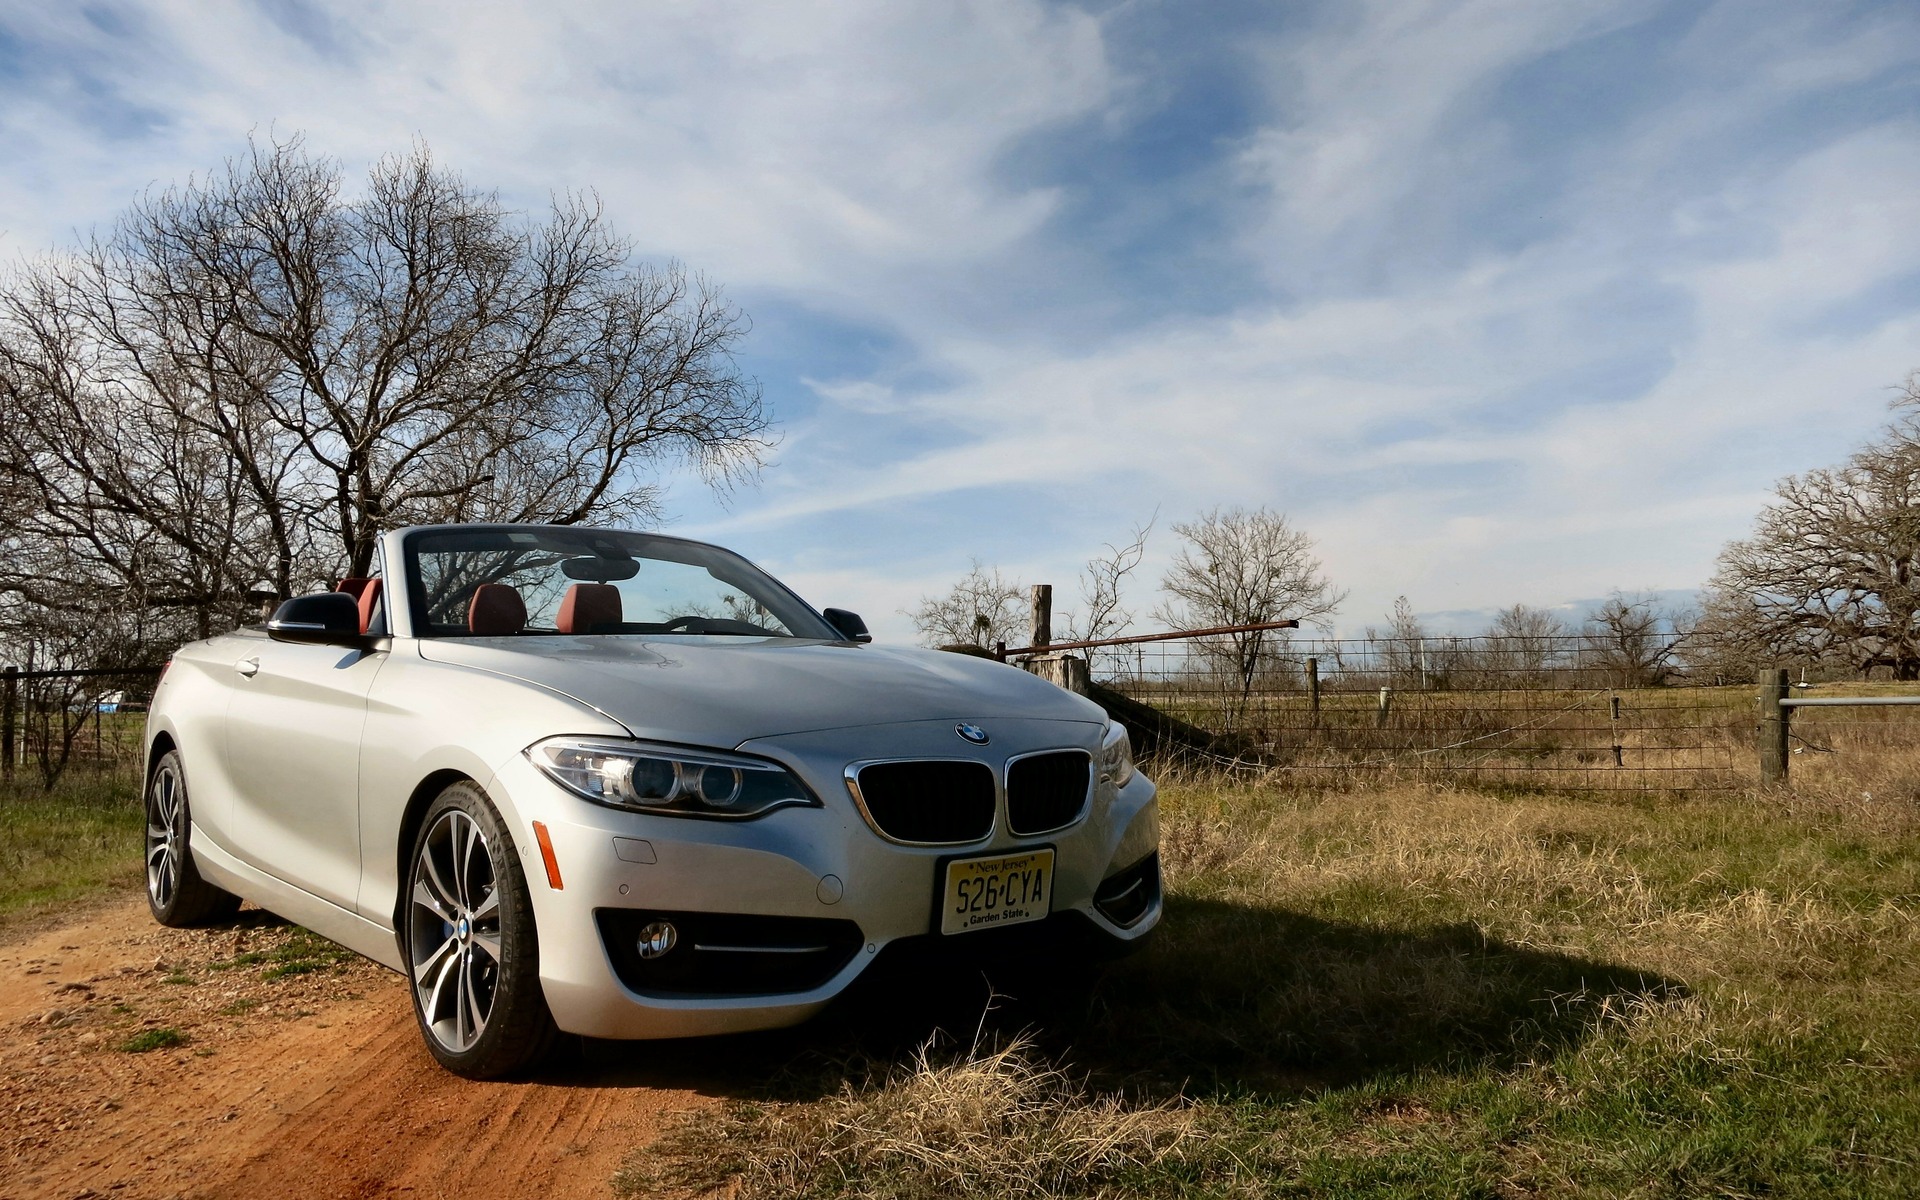 The 2 Series Convertible was well-composed at a range of speeds.